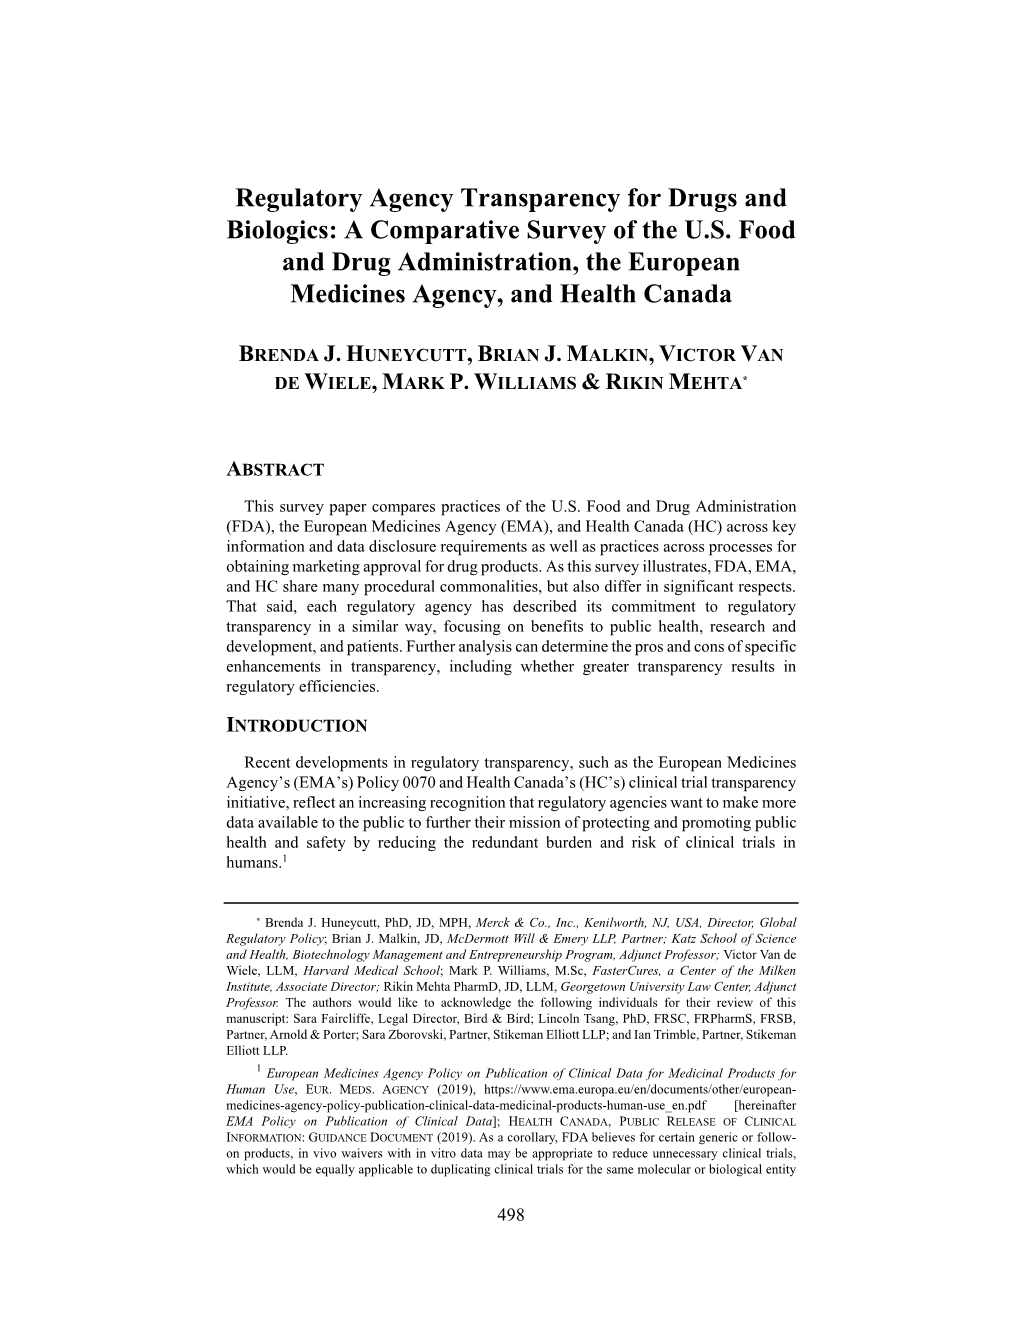 Regulatory Agency Transparency for Drugs and Biologics: a Comparative Survey of the U.S